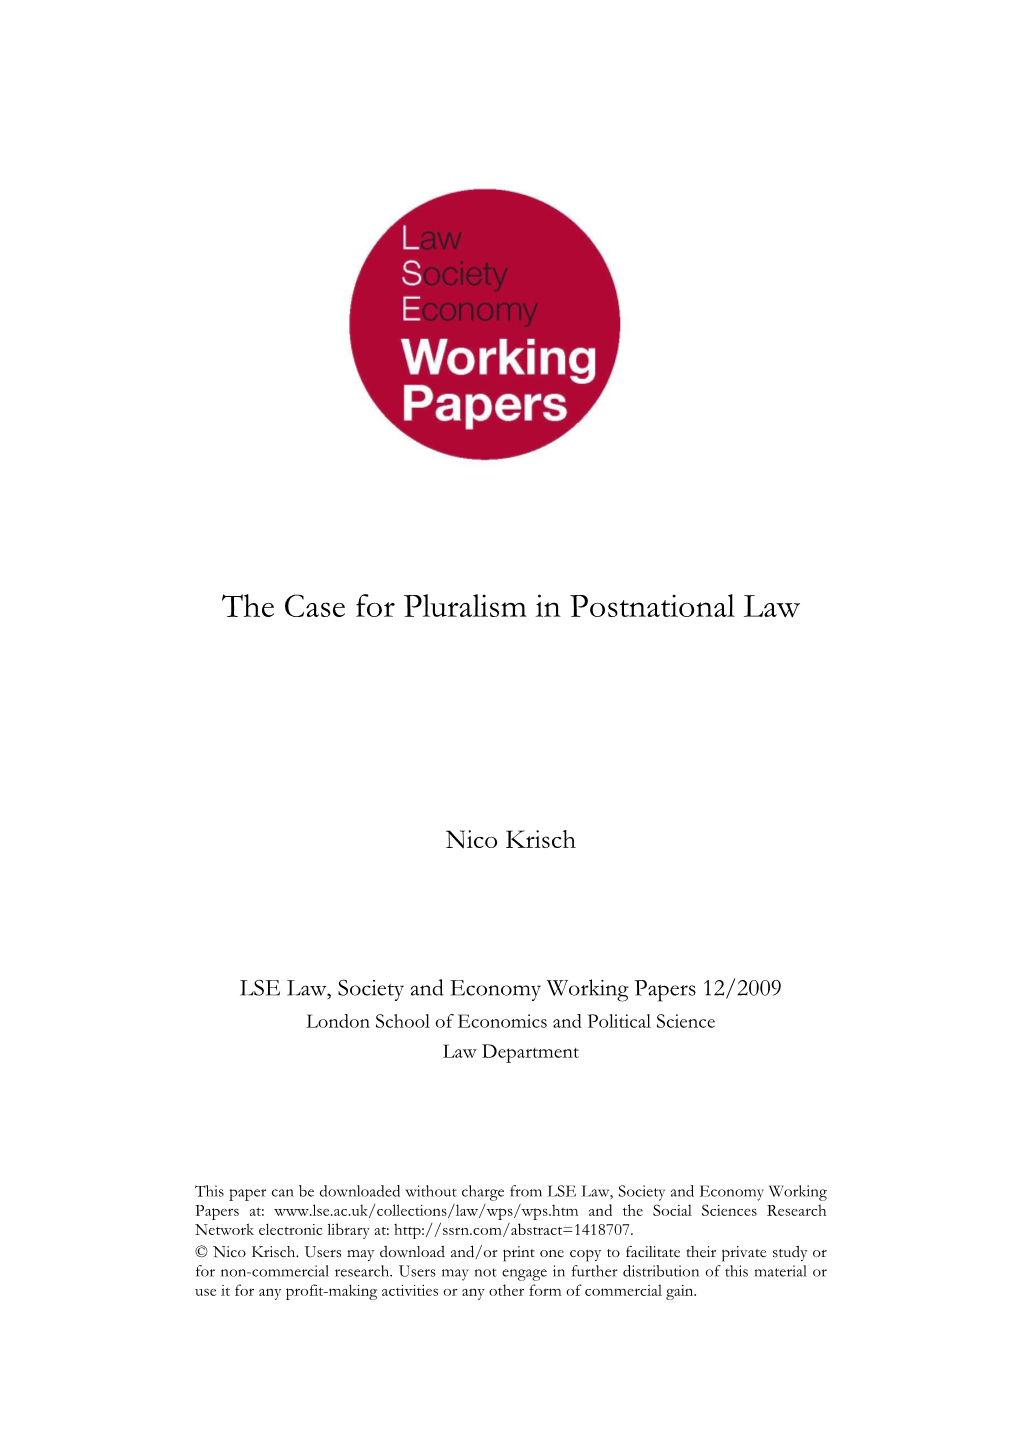 The Case for Pluralism in Postnational Law